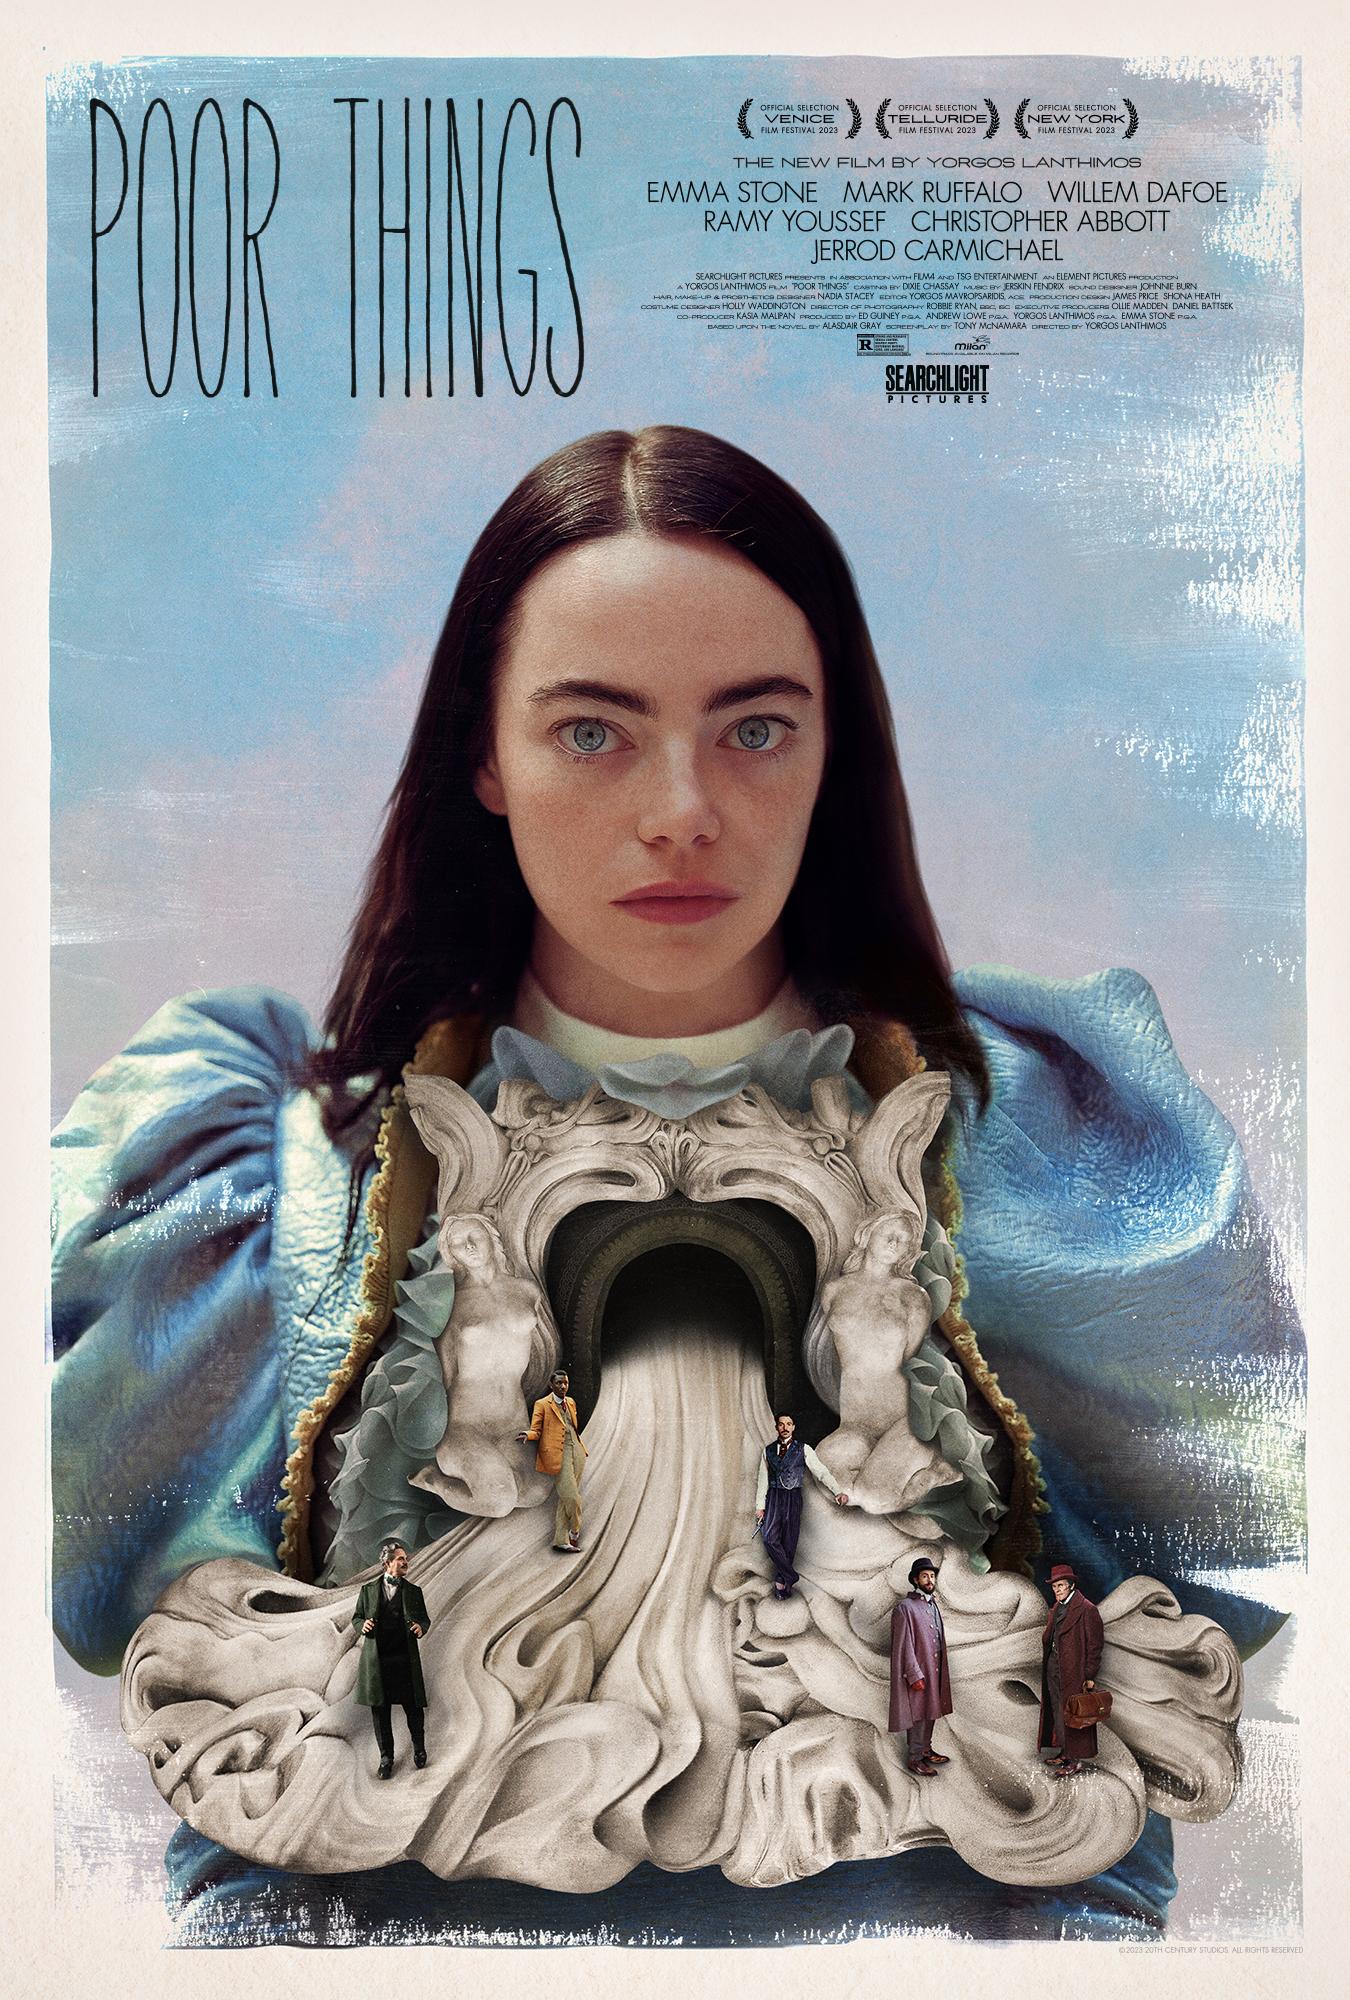 Enter to Win Free Tickets to see Searchlight Pictures’ POOR THINGS